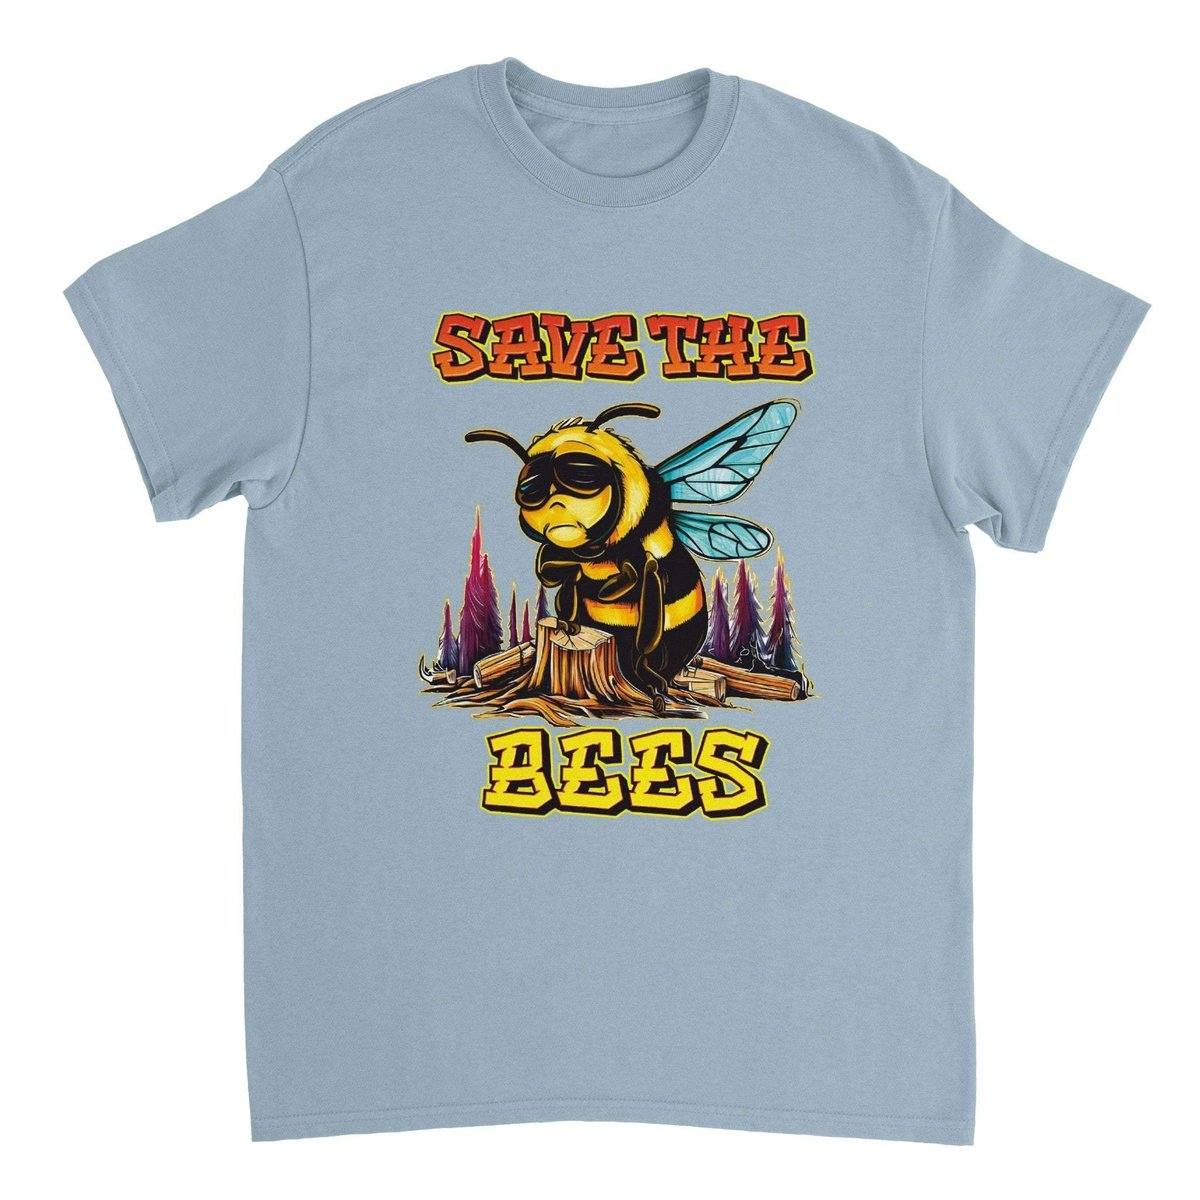 Save The Bees Tshirt - Crying Bee - Unisex Crewneck T-shirt Australia Online Color Light Blue / S